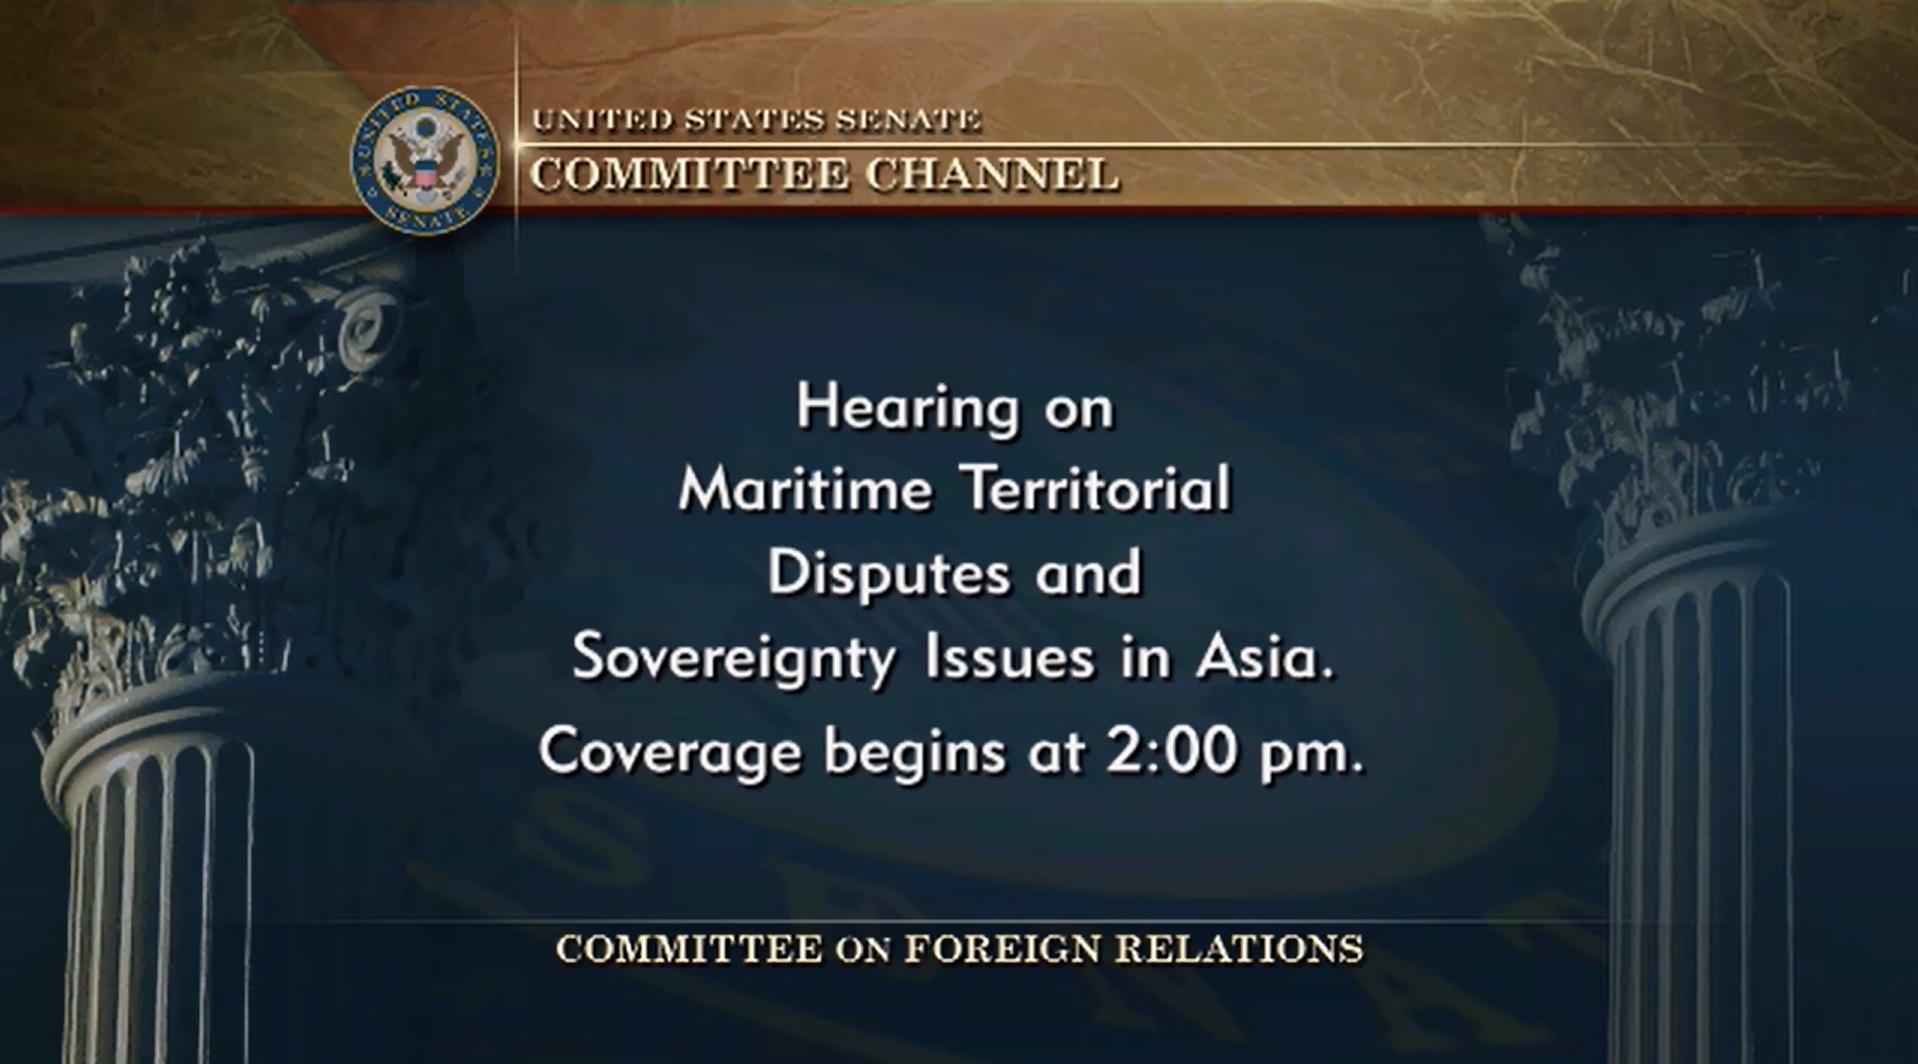 Senate Hearing on Maritime Territorial Disputes and Sovereignty Issues